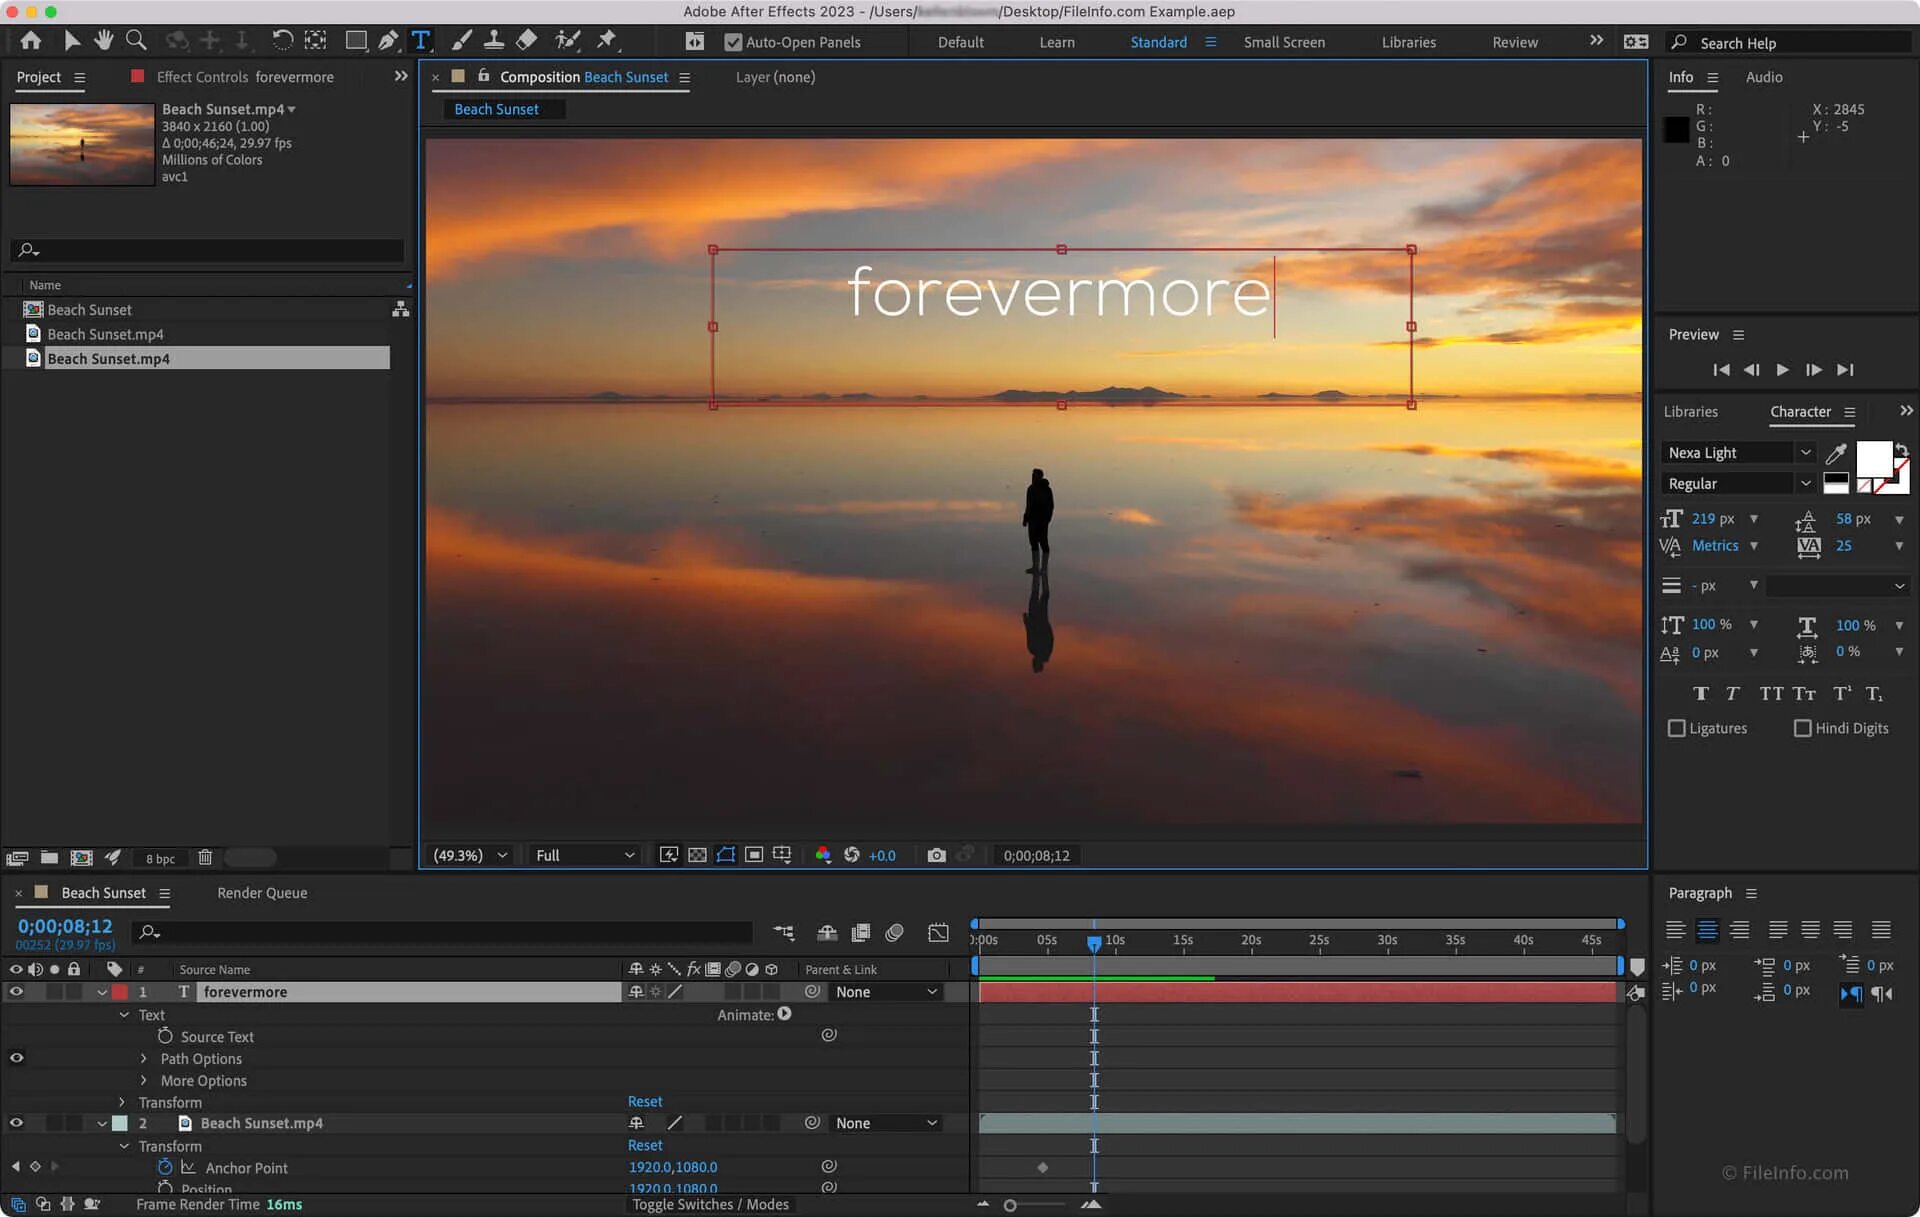 Adobe after Effects. Проекты after Effects. Adobe after Effects 2023. Адобе Афтер эффект. Adobe effect pro